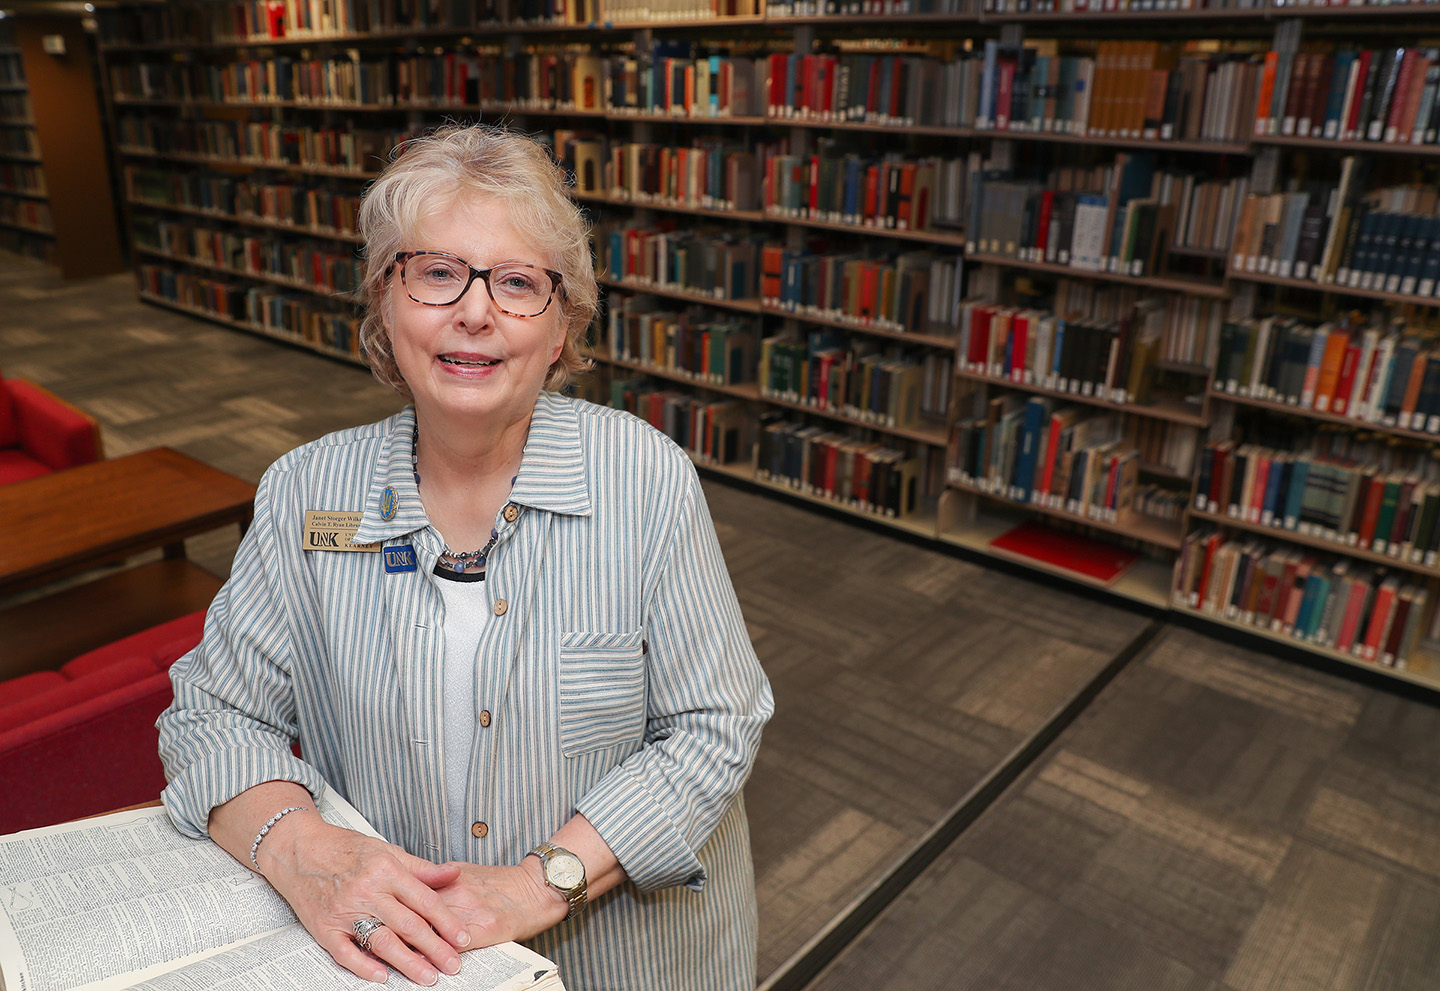 Janet Stoeger Wilke retired Thursday after working at UNK’s Calvin T. Ryan Library for 34 years. She served as dean of the library for 15 years. (Photos by Erika Pritchard, UNK Communications)